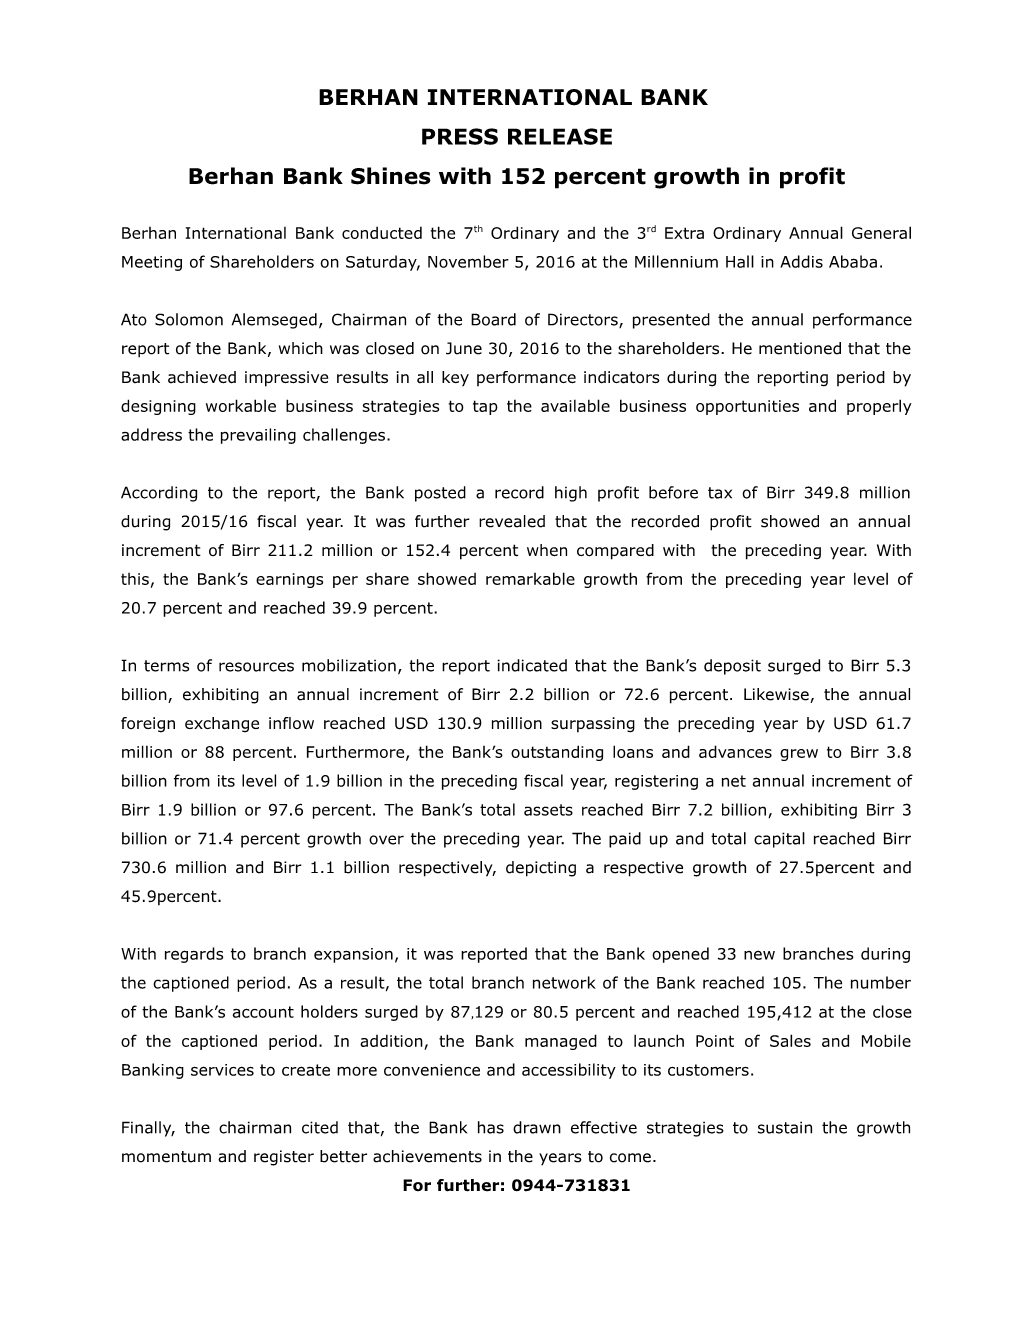 Berhan Bank Shines with 152 Percent Growth in Profit